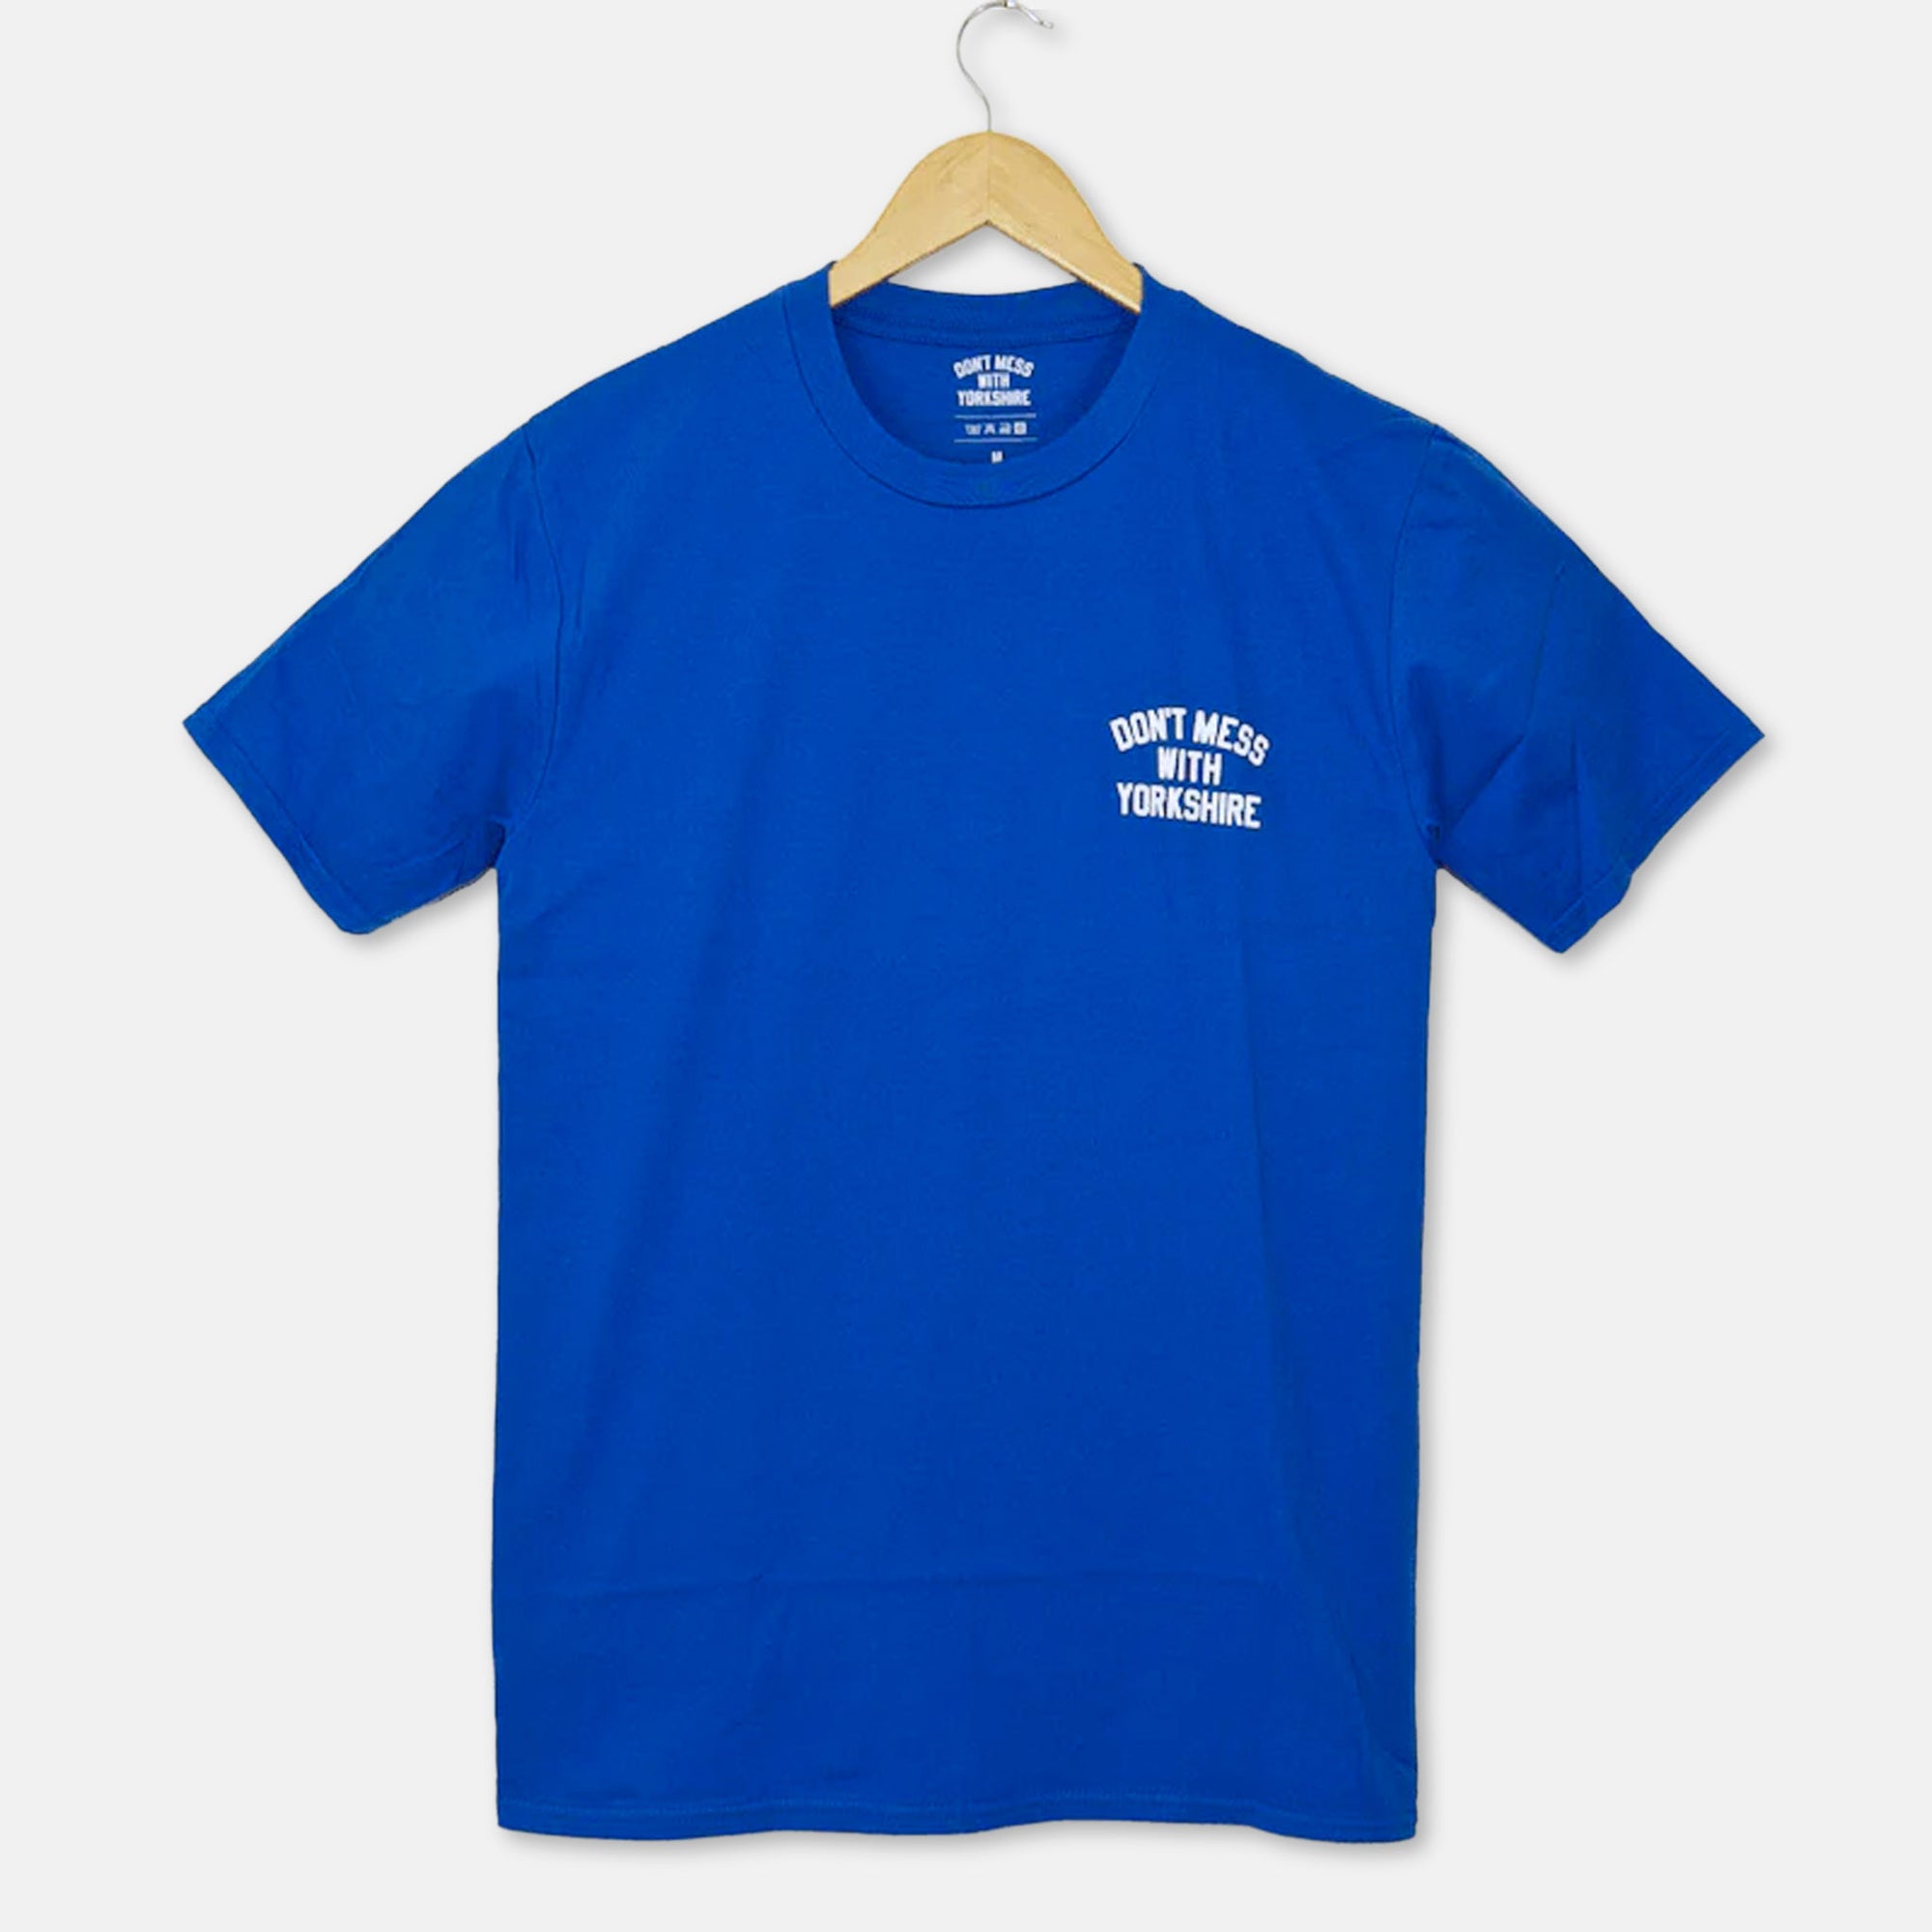 Don't Mess With Yorkshire - Rose T-Shirt - Royal Blue / White